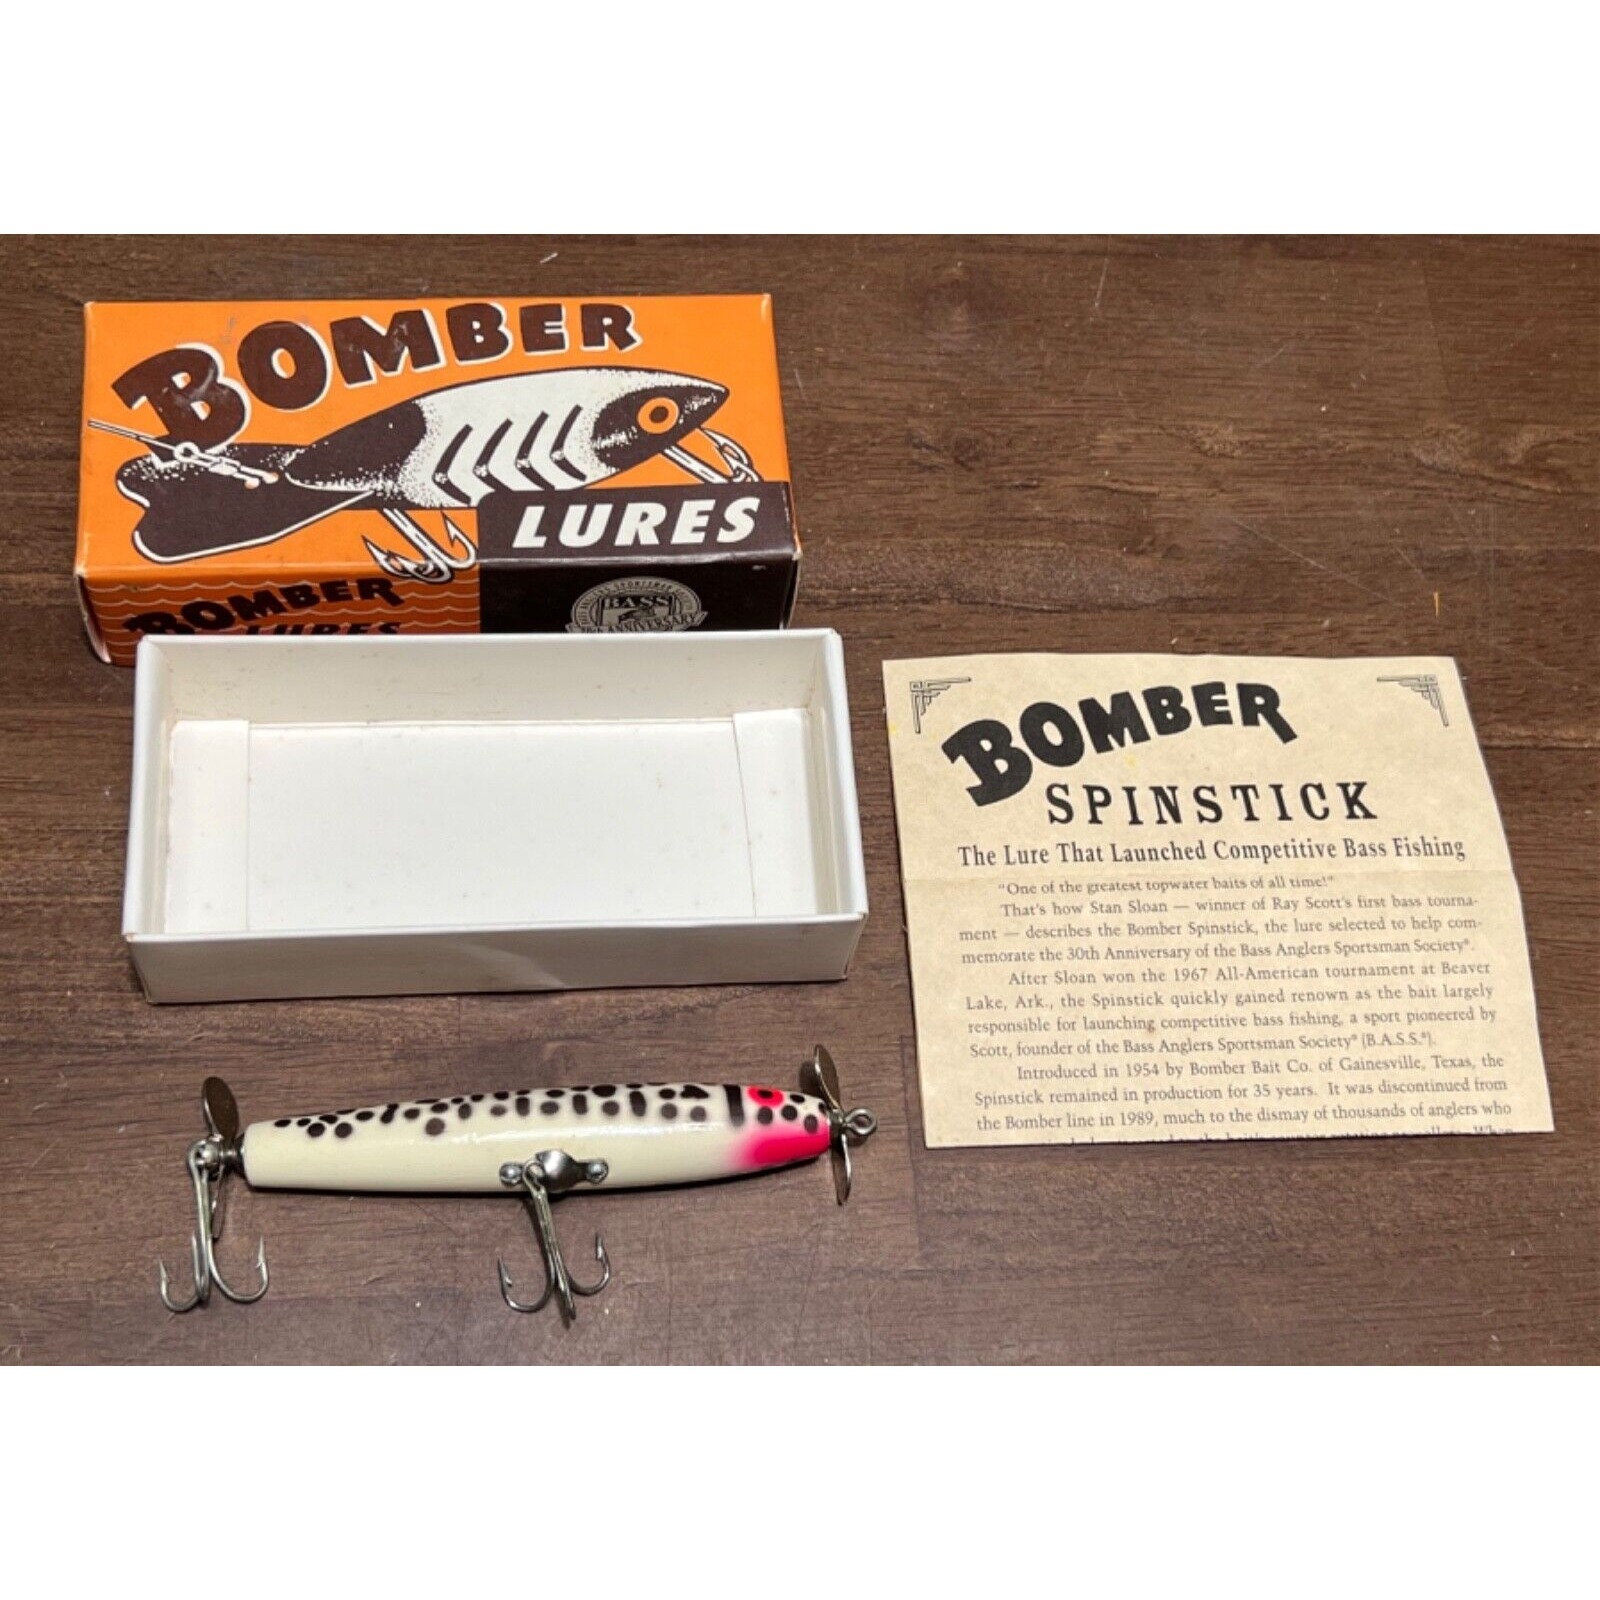 BOMBER LURE 30th Anniversary B.A.S.S. Spinstick Lure Nice Condition 